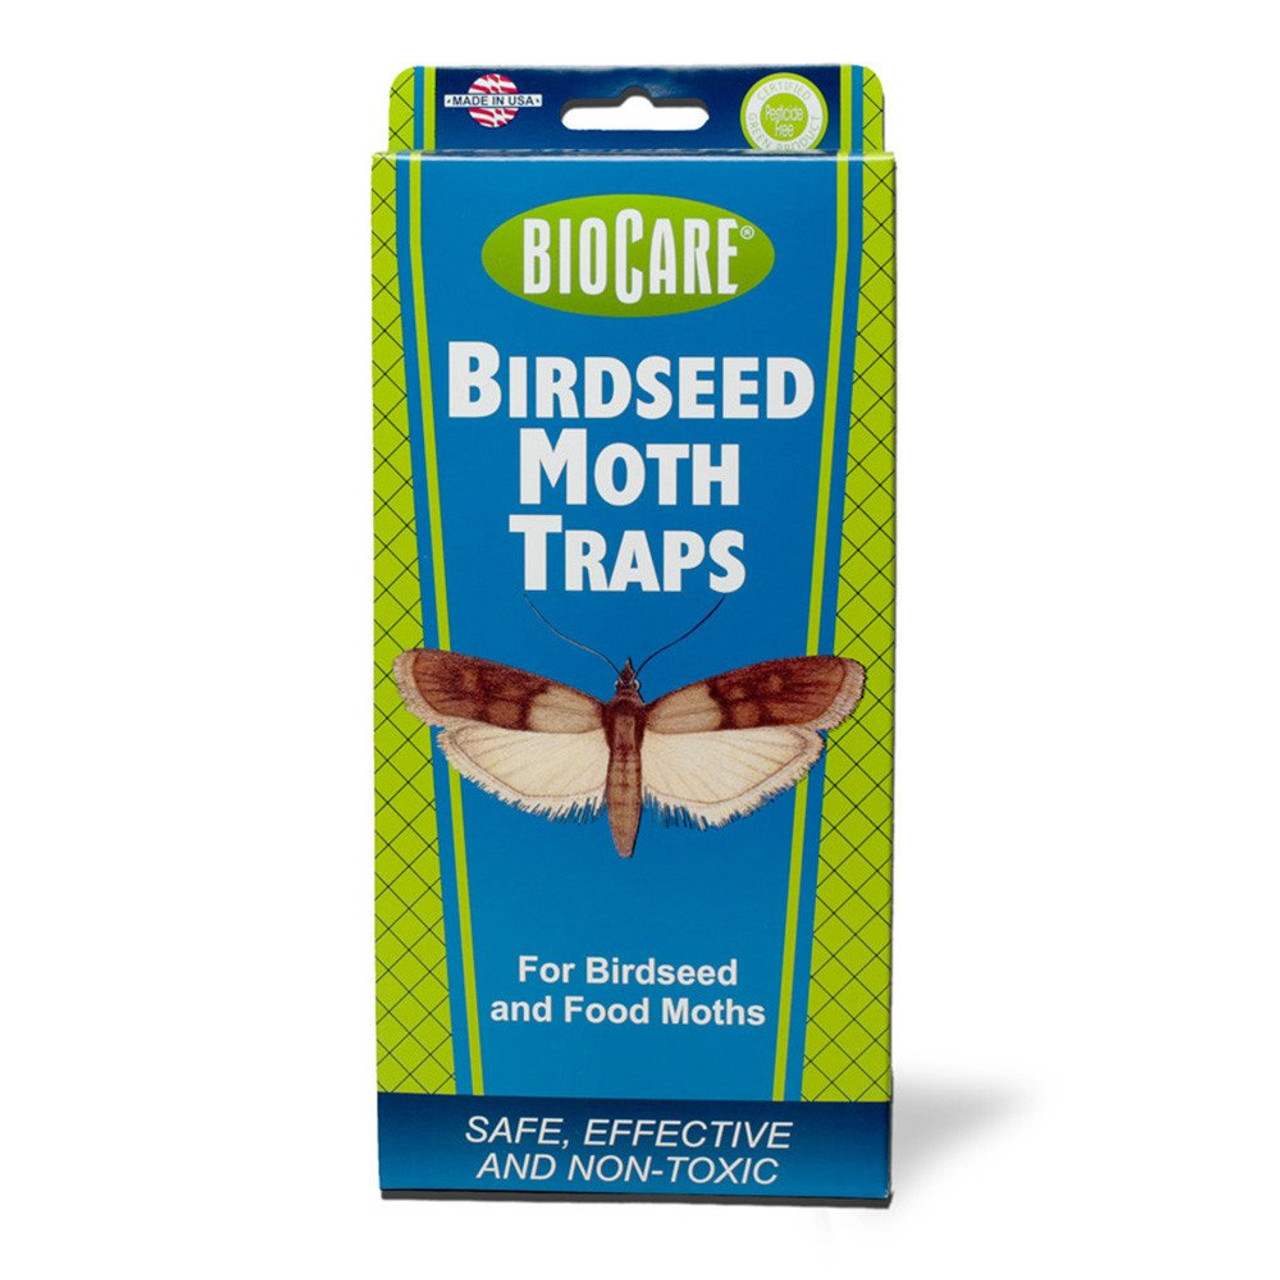 Pantry Moth Traps Indian Meal Moth Traps (12 pack ) Bird Seed Flour Moth  Traps